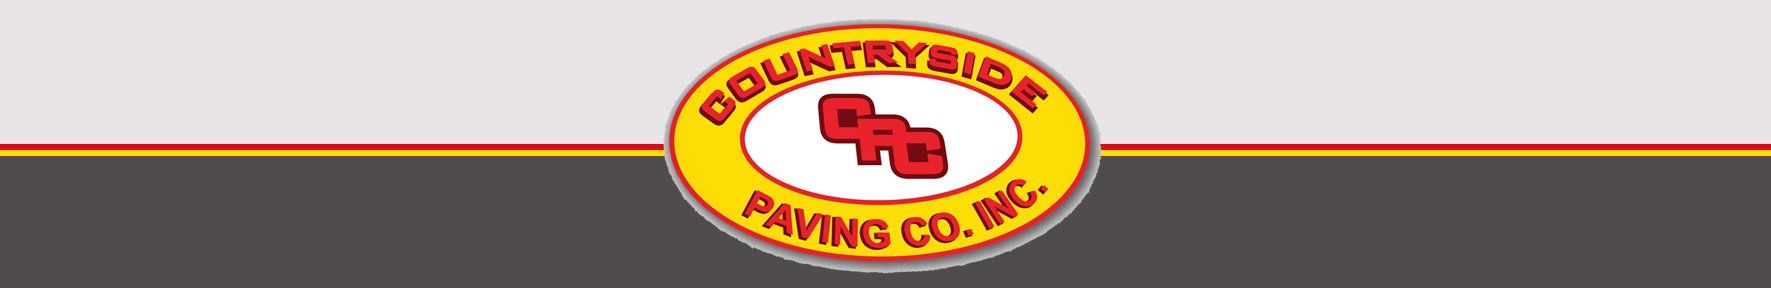 Countryside Paving Co